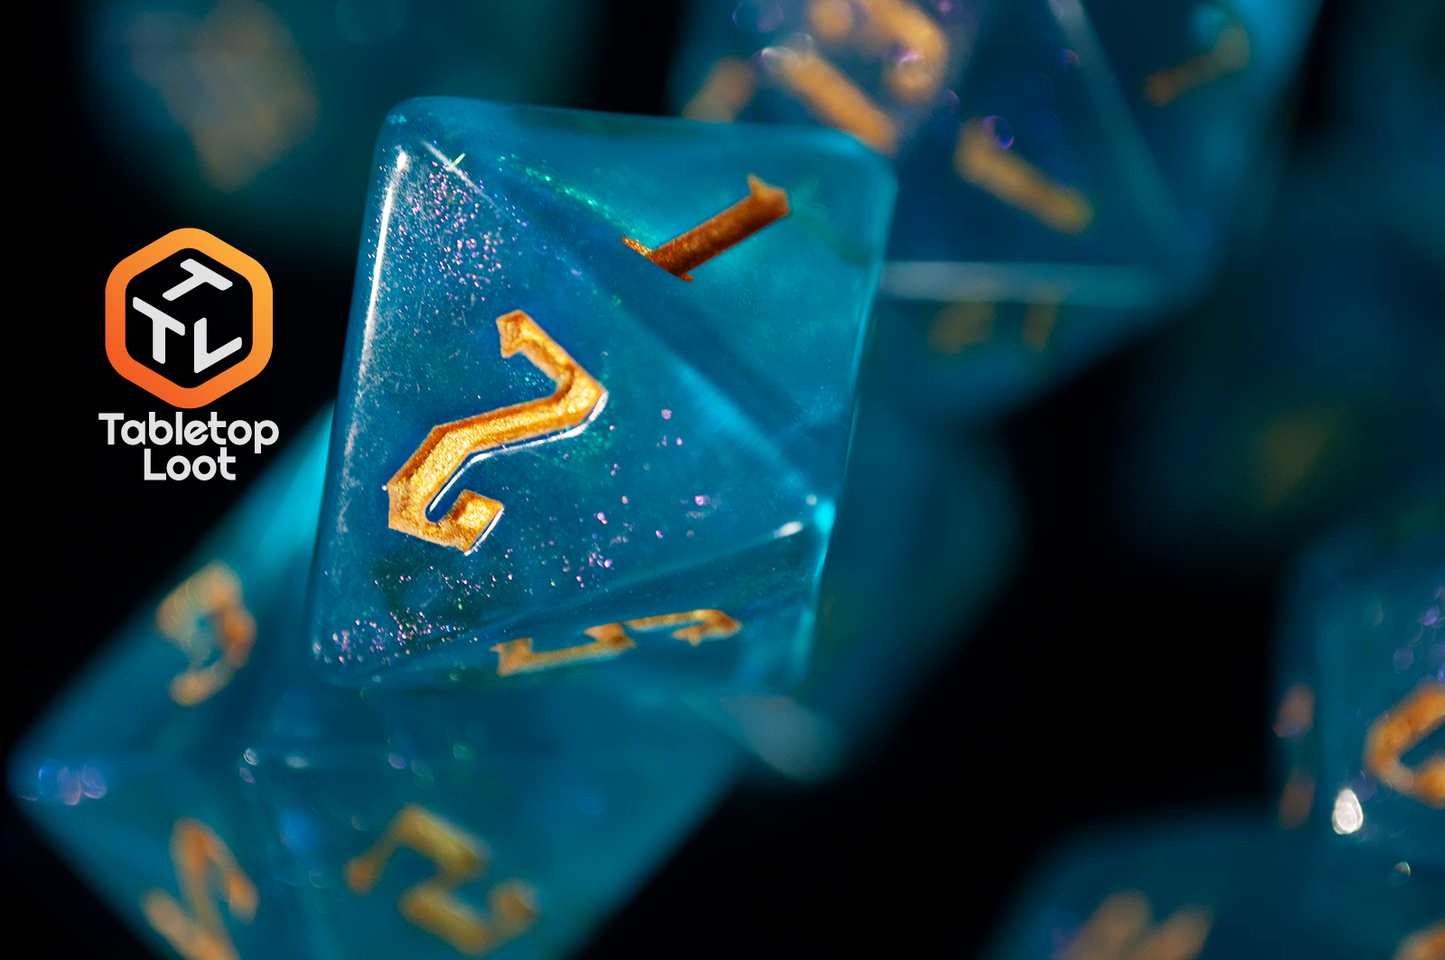 A close up of the D8 from the Draconic Seas 7 piece dice set from Tabletop Loot with shimmering translucent blue resin and gold numbering.